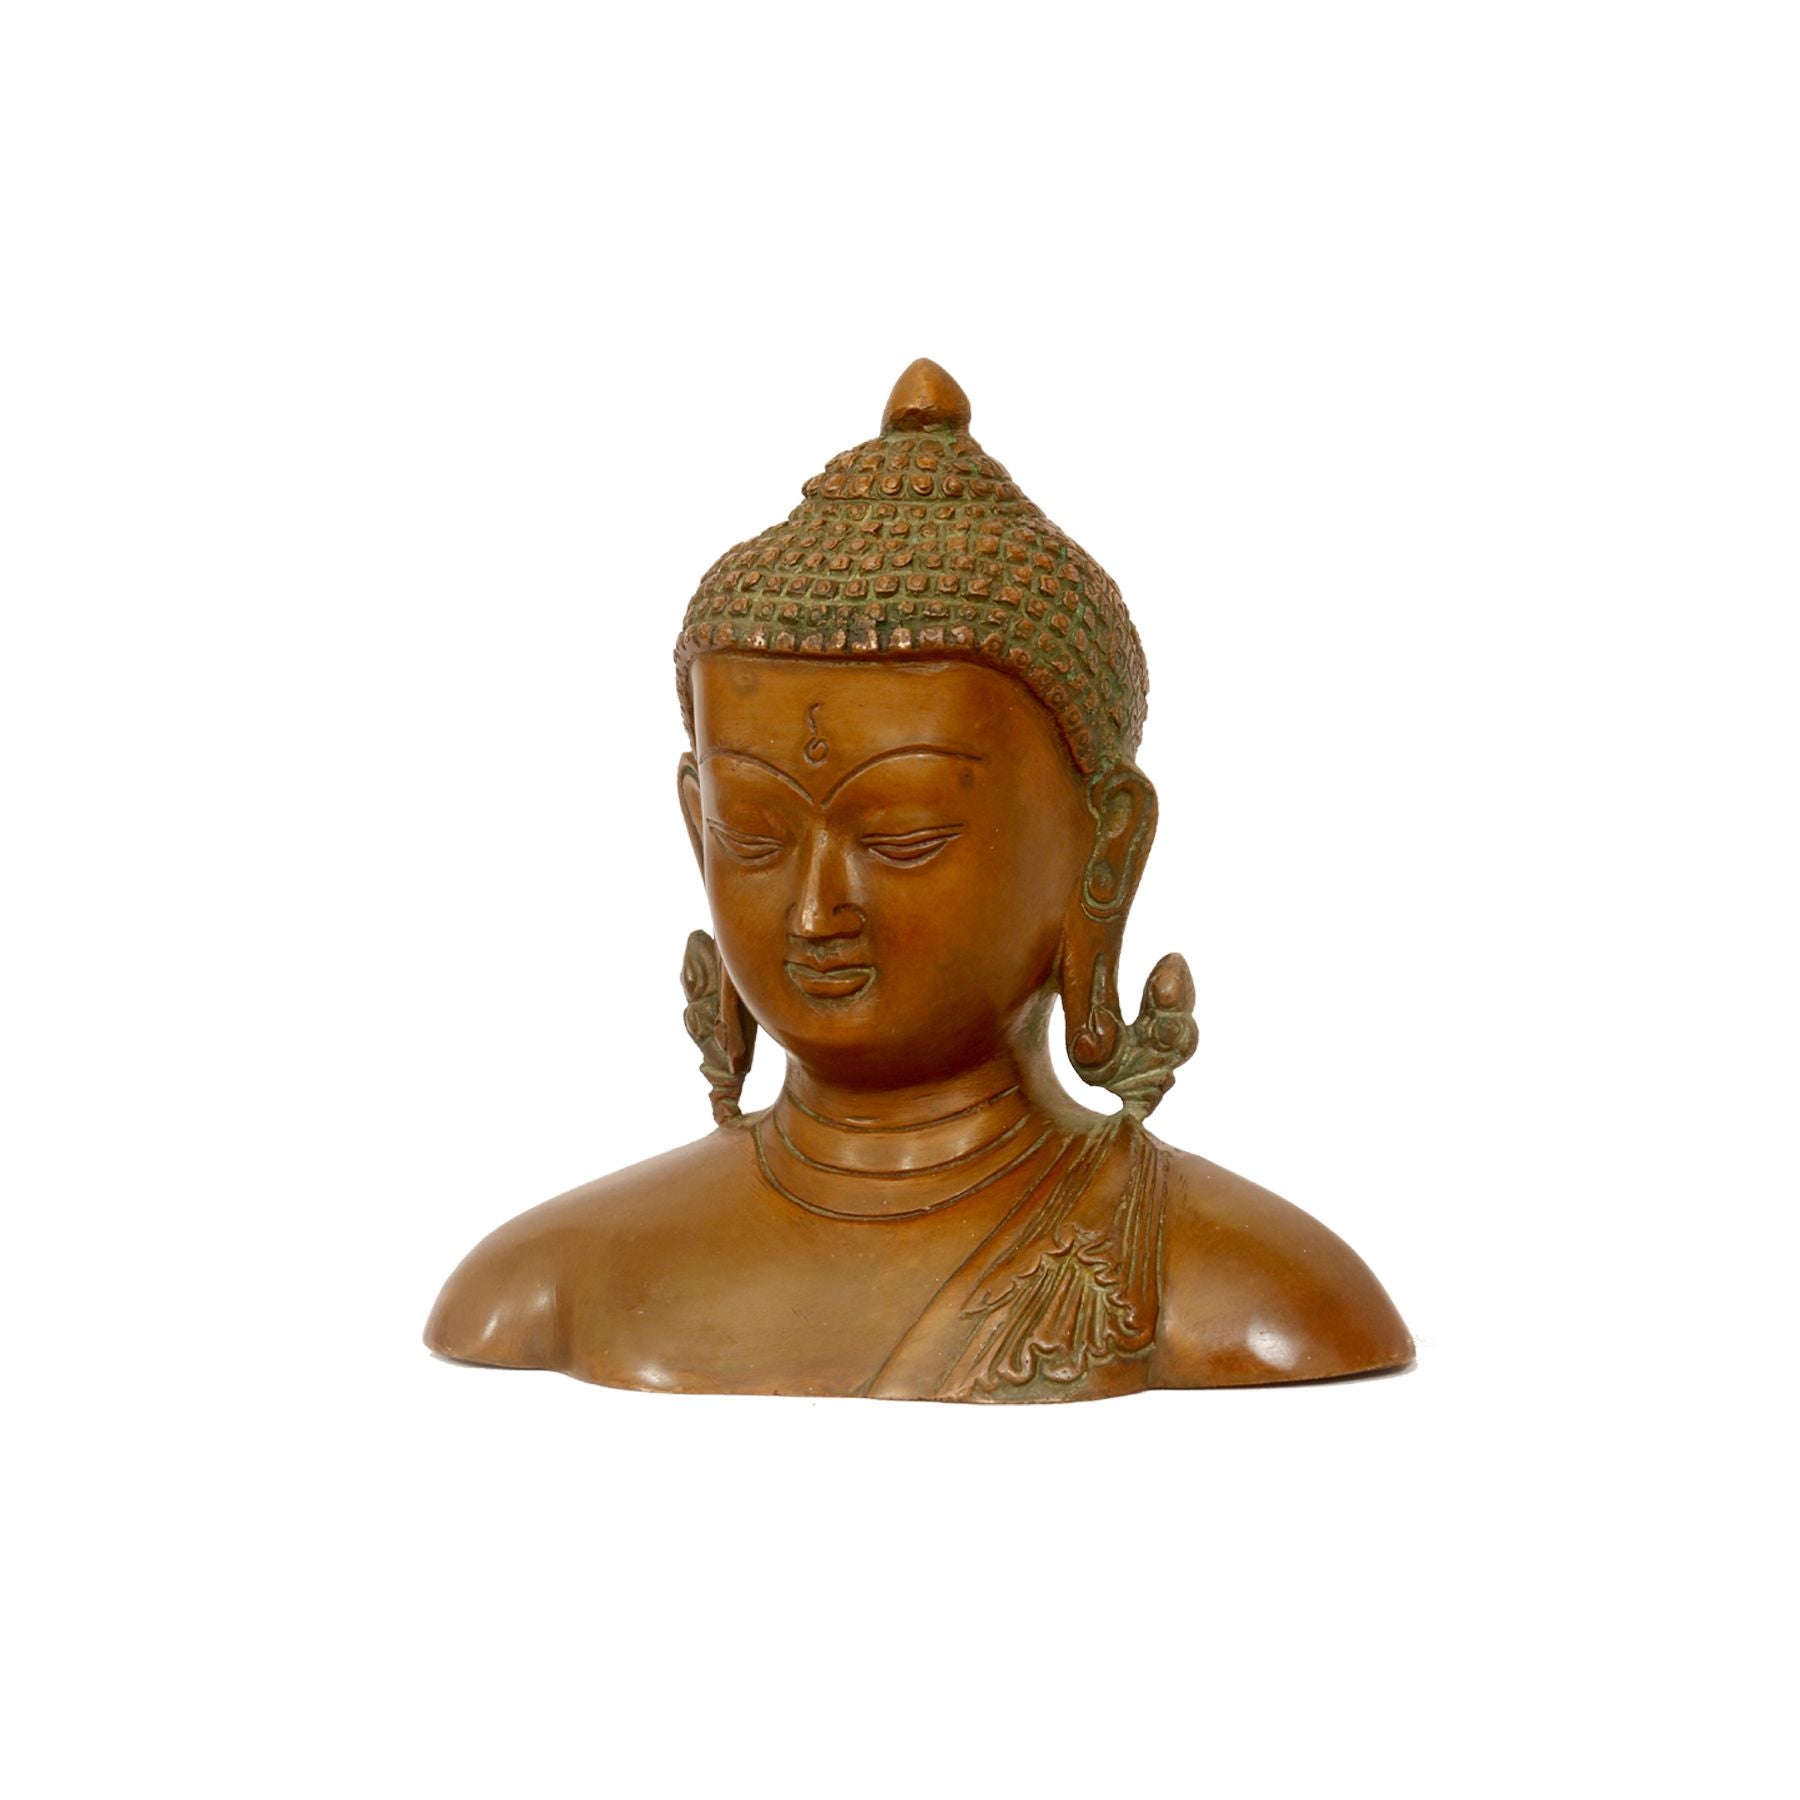 Antique Solid Metal Buddha Bust/Head Statue Statue